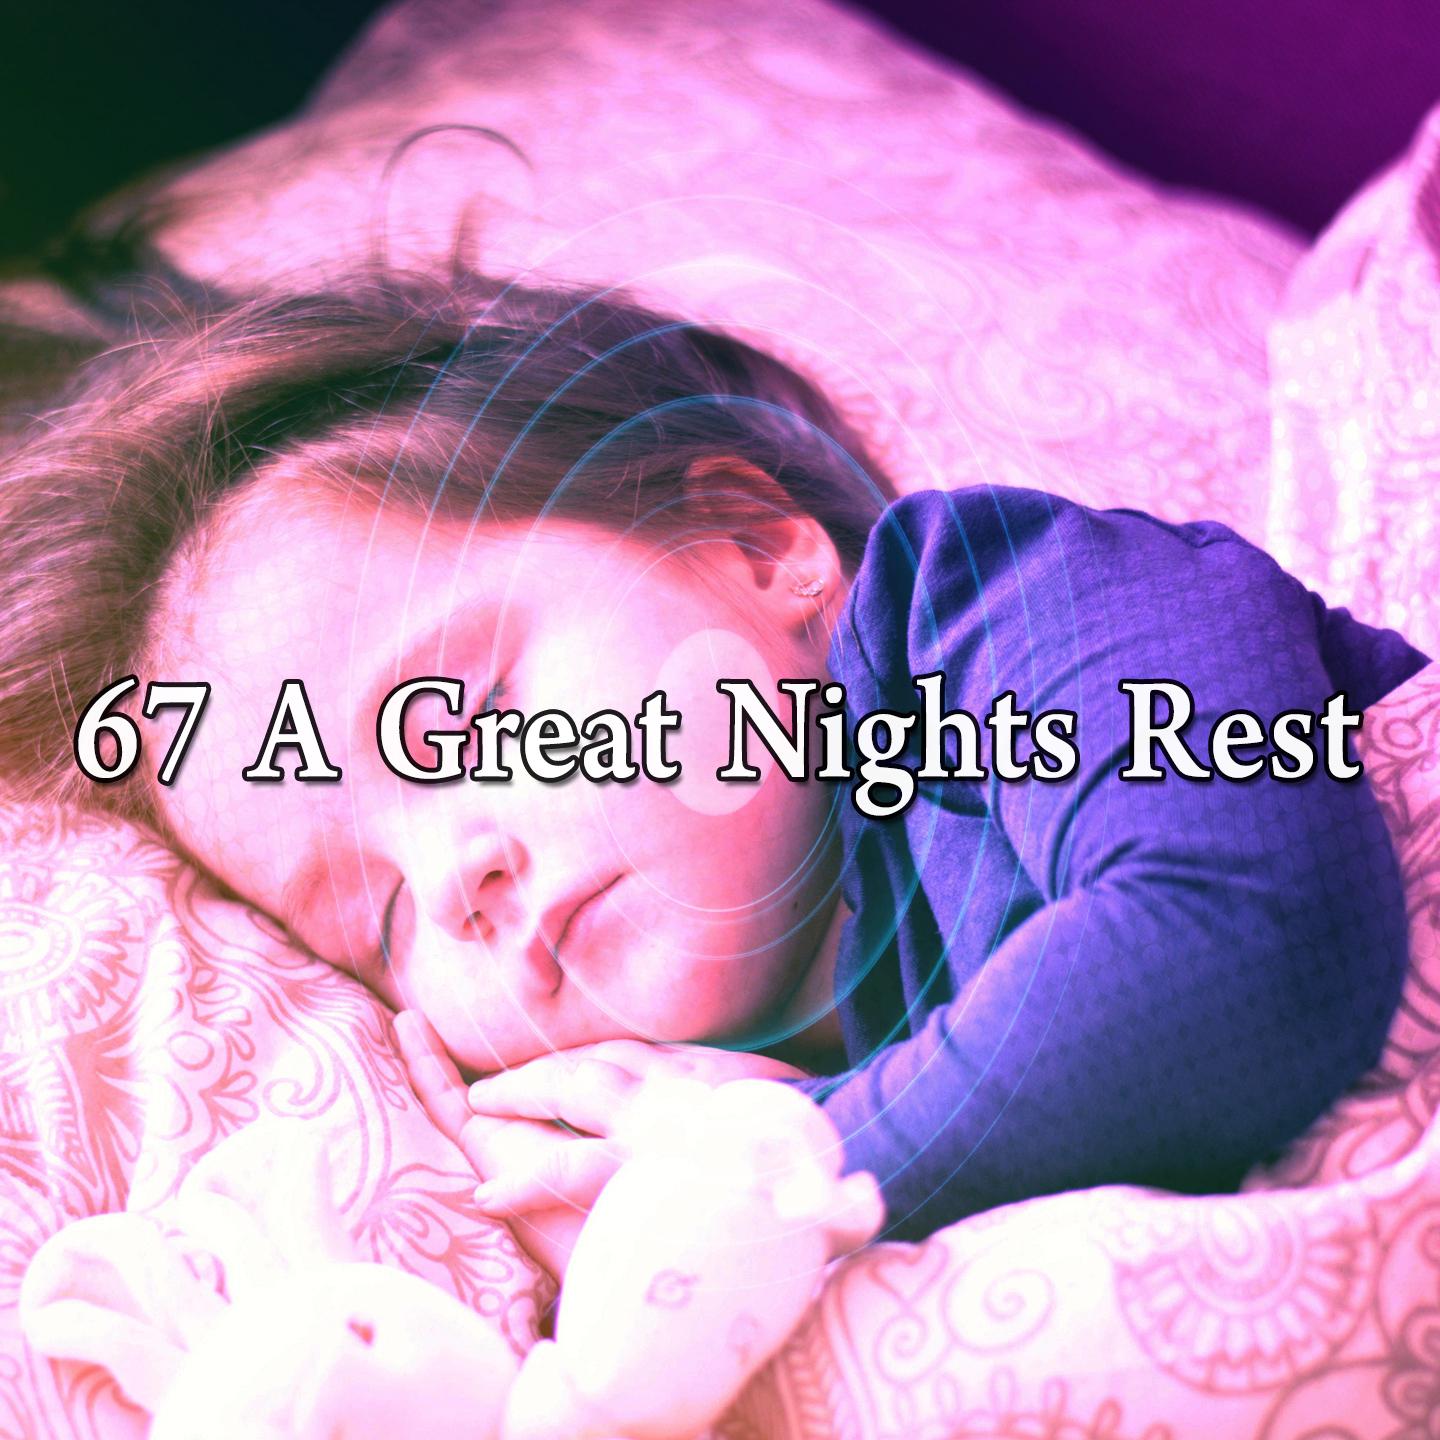 67 A Great Nights Rest